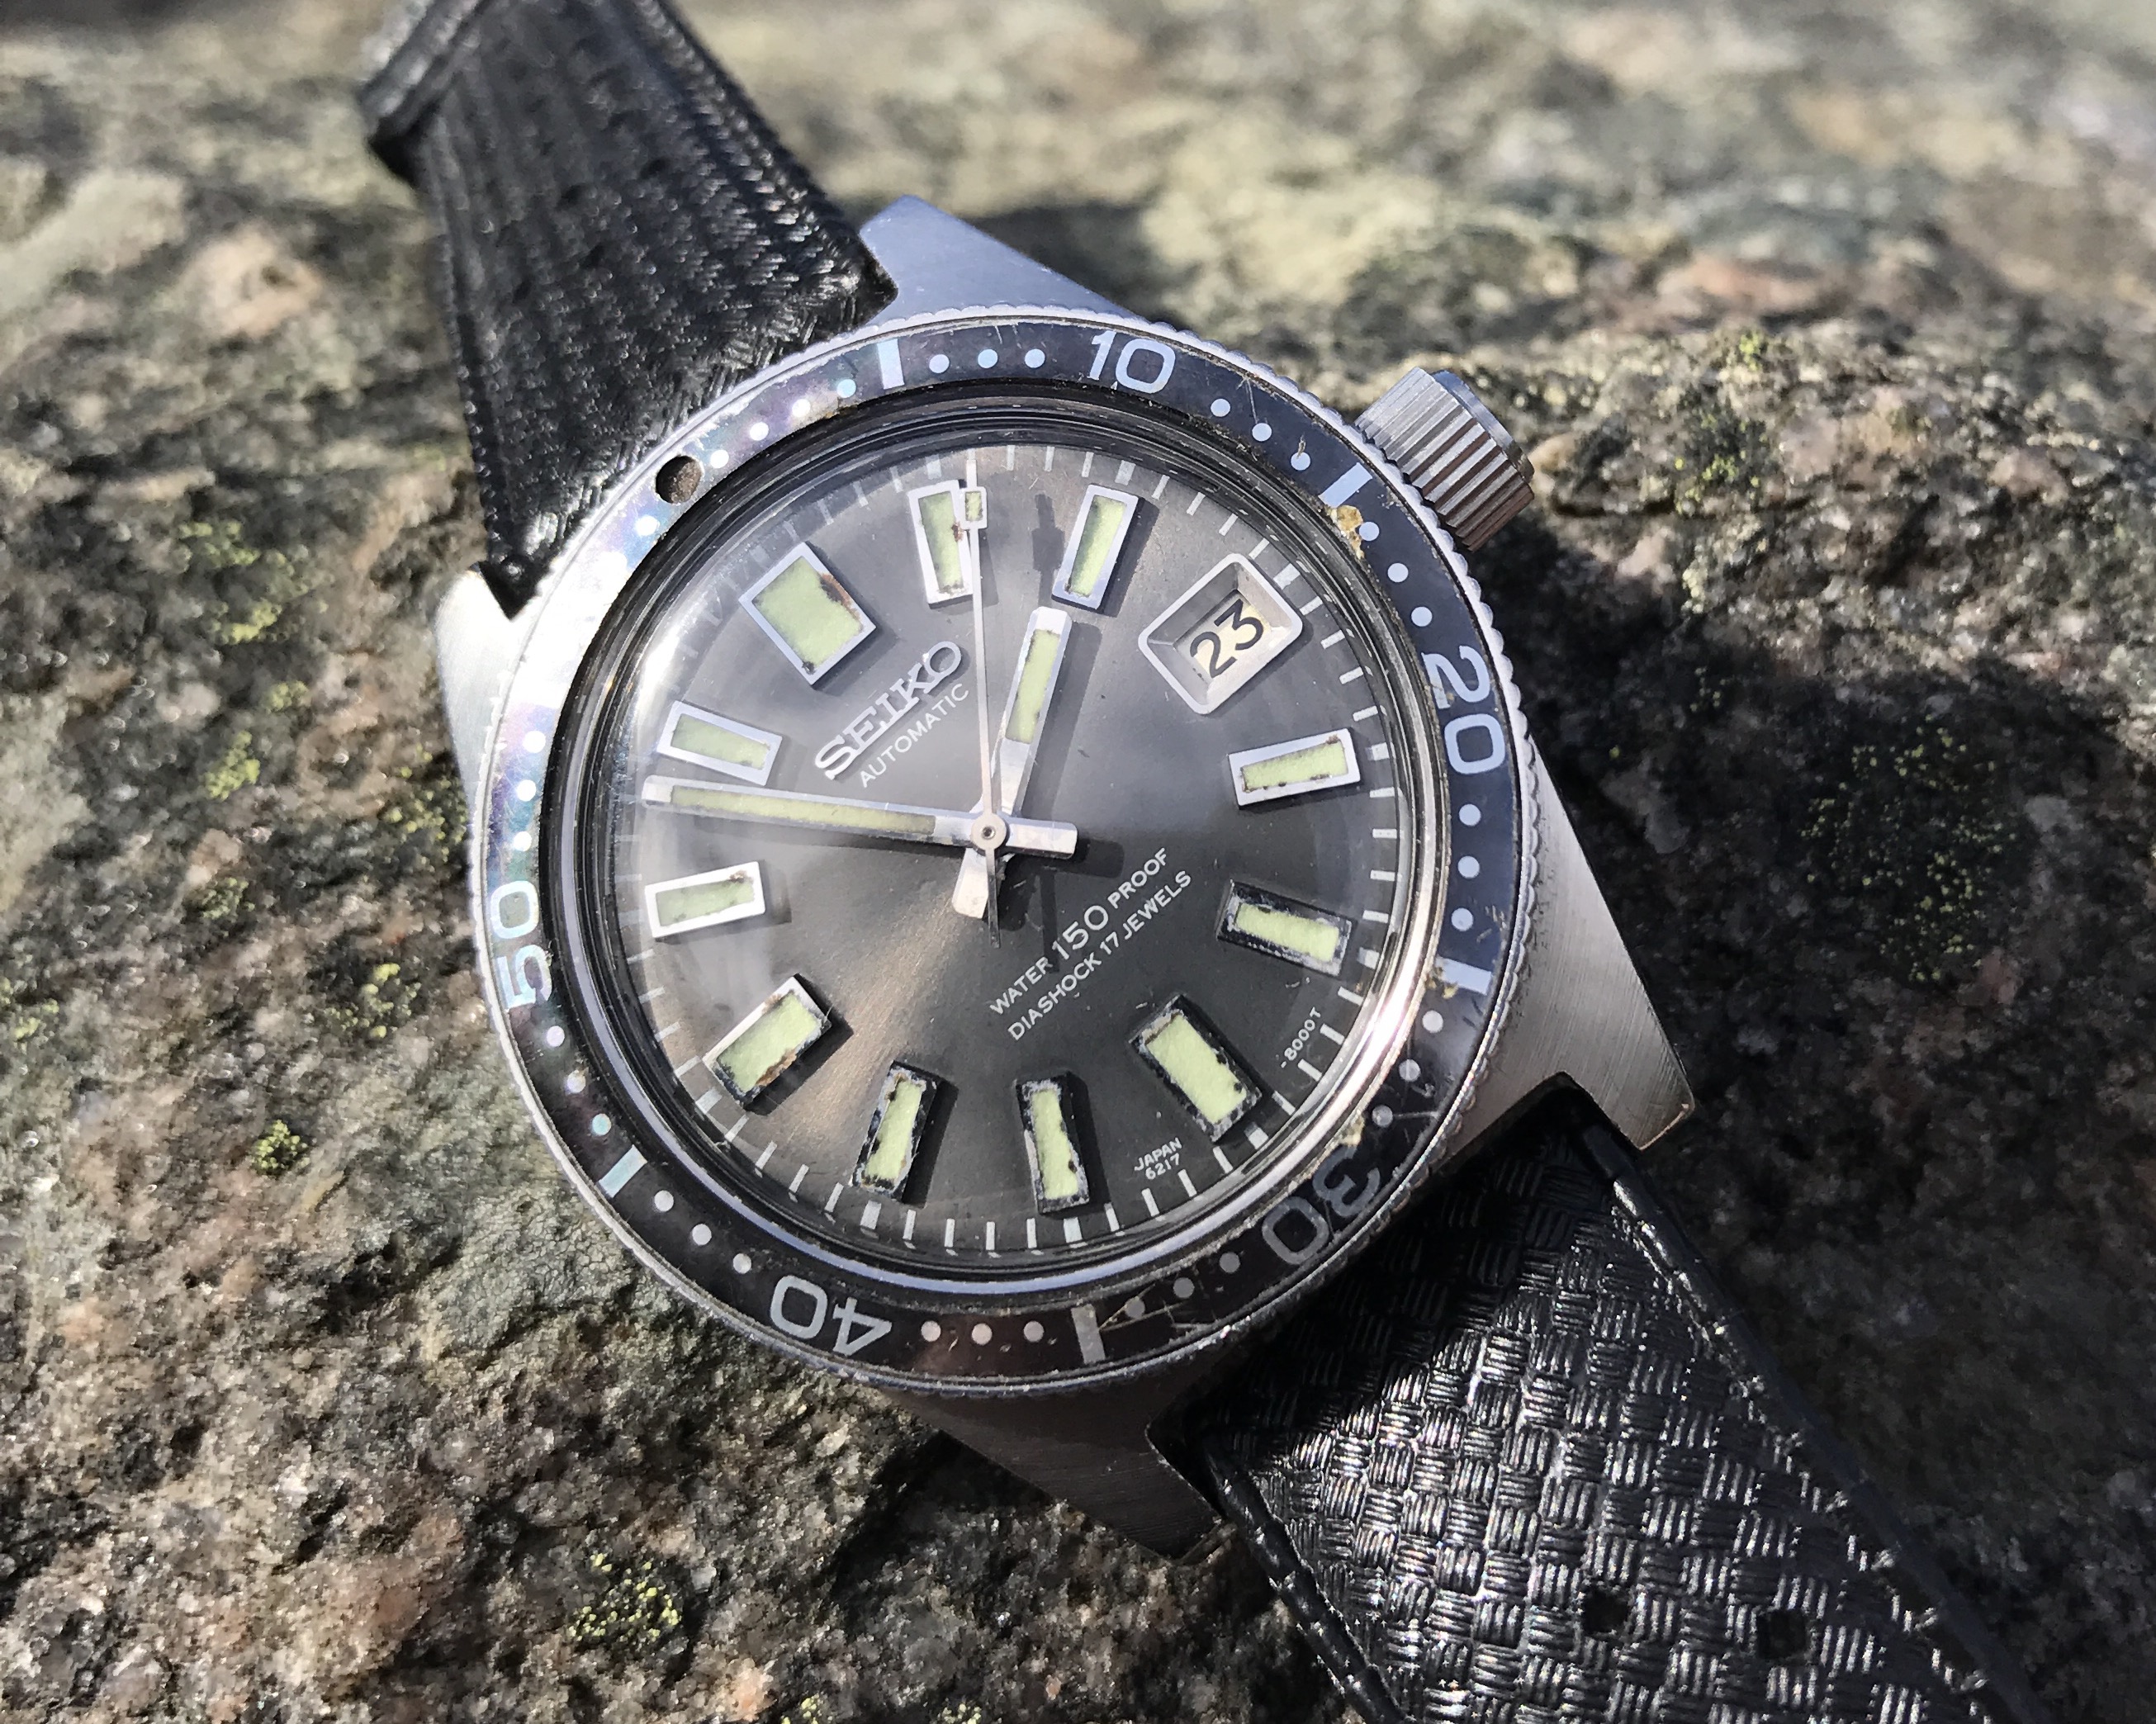 New arrival: SEIKO 6217 aka 62Mas – yonsson – Watches, inside and out